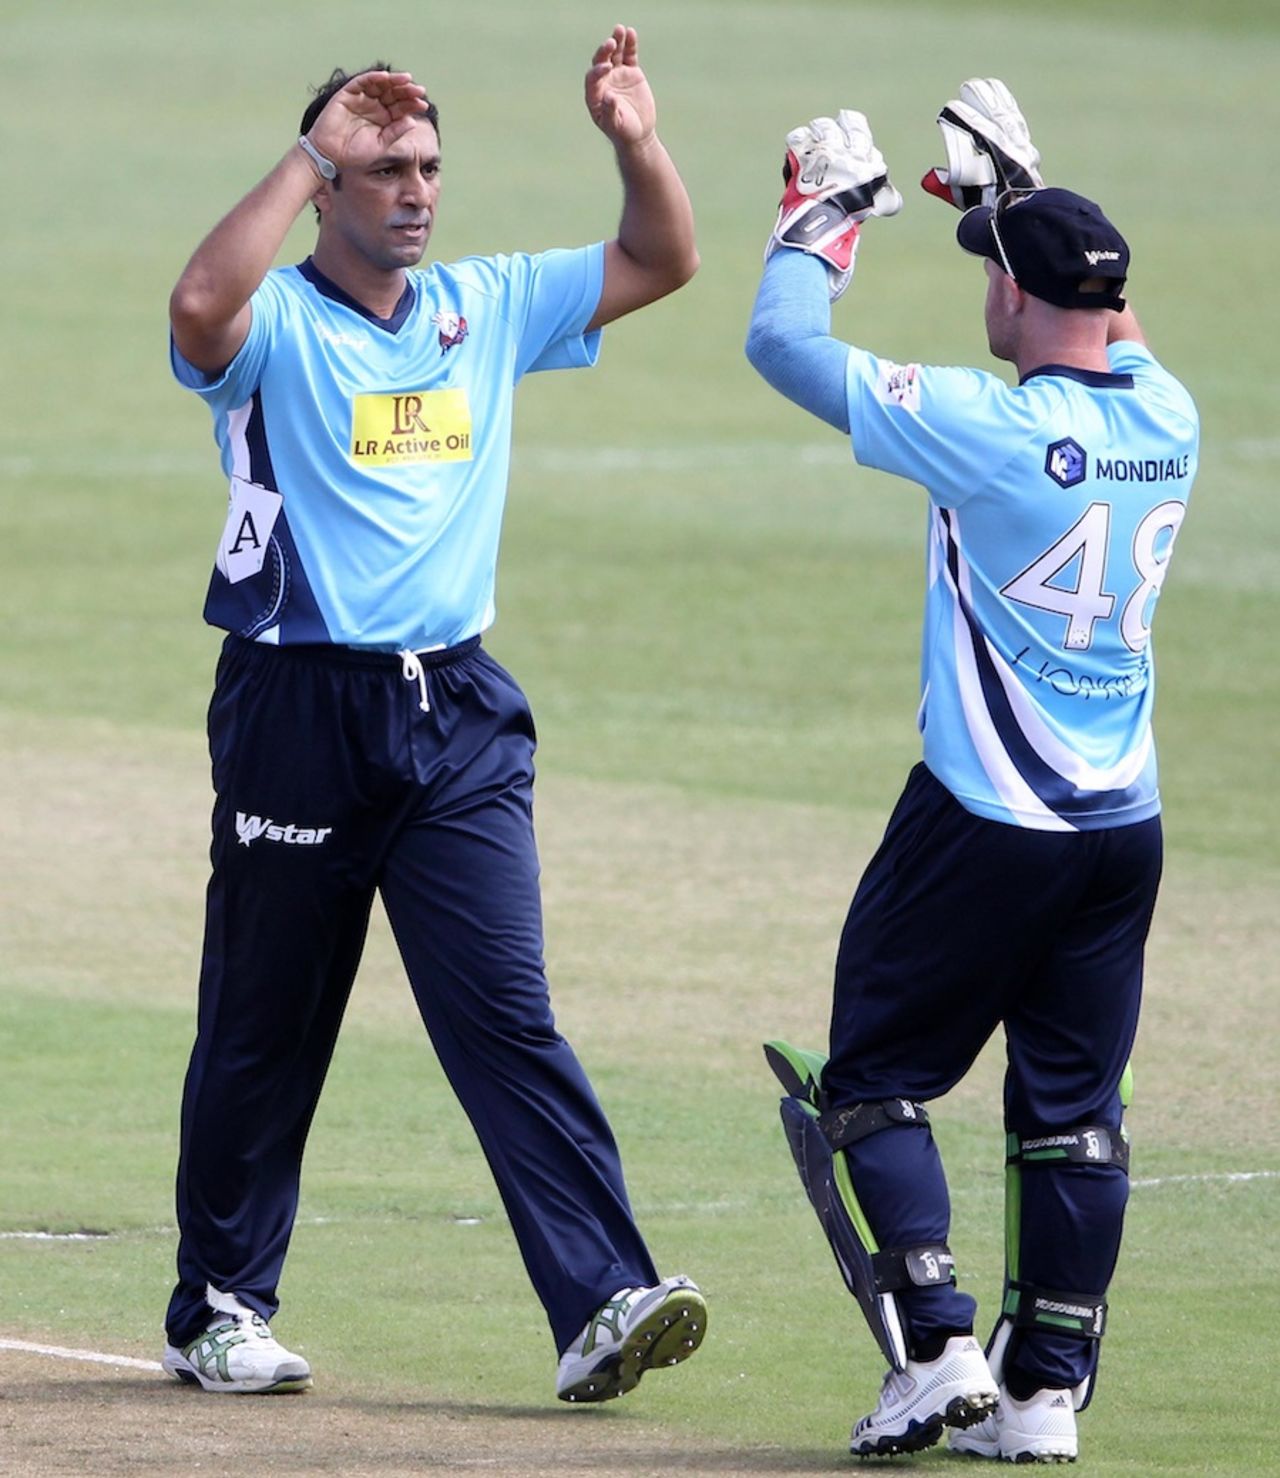 Azhar Mahmood took the first wicket to fall, Auckland Aces v Titans, Group A, Champions League T20, Durban, October 17, 2012